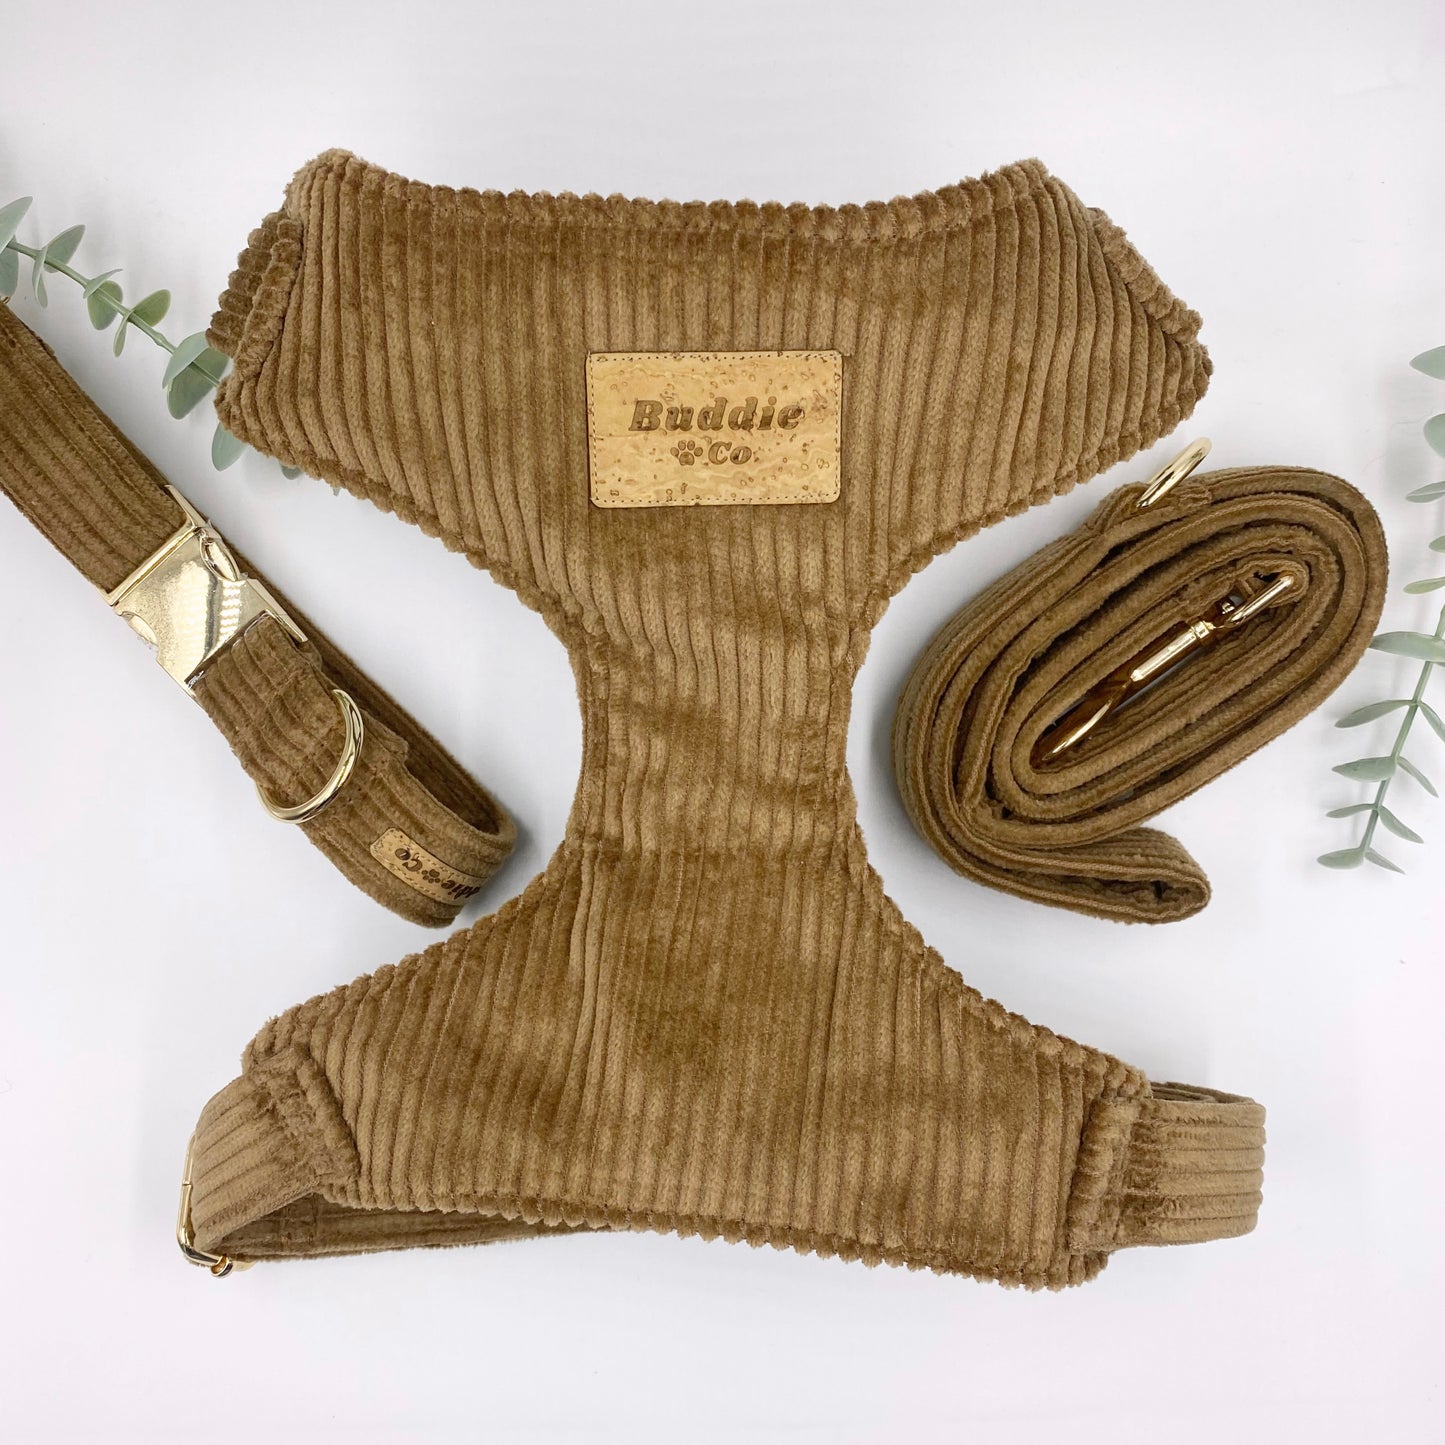 The 'Teddy' Chest Harness